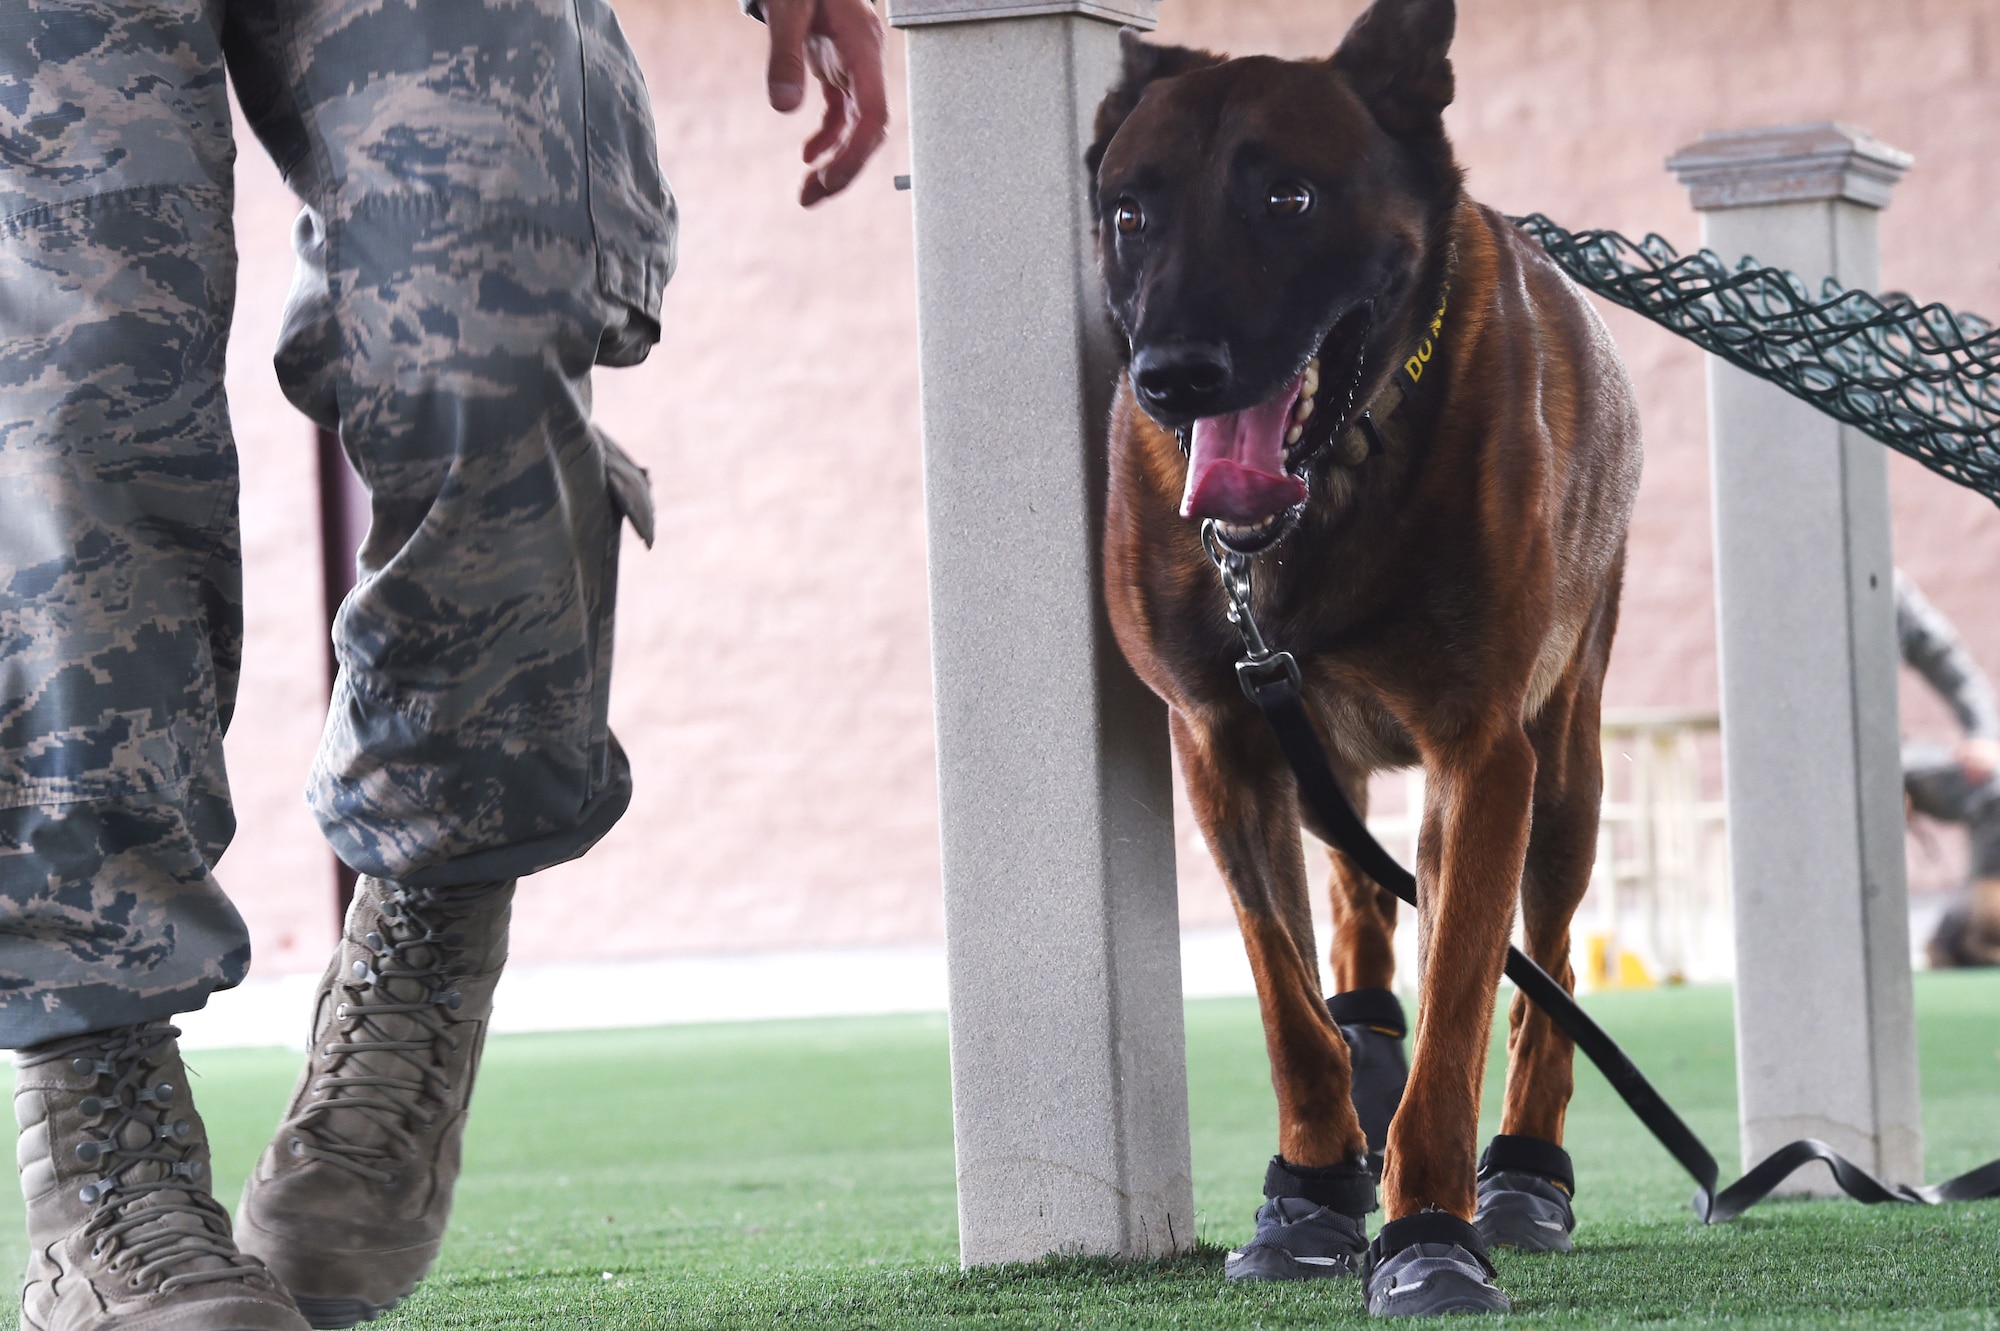 SSamuel 799th Security Forces Squadron, military working dog, goes through search procedures on Sept 1, 2017 at Creech Air Force Base, Nev. The dogs wear these booties for protect from rough terrain and inclement weather conditions. (U.S. Air Force photo by Airman 1st Class Adarius Petty)